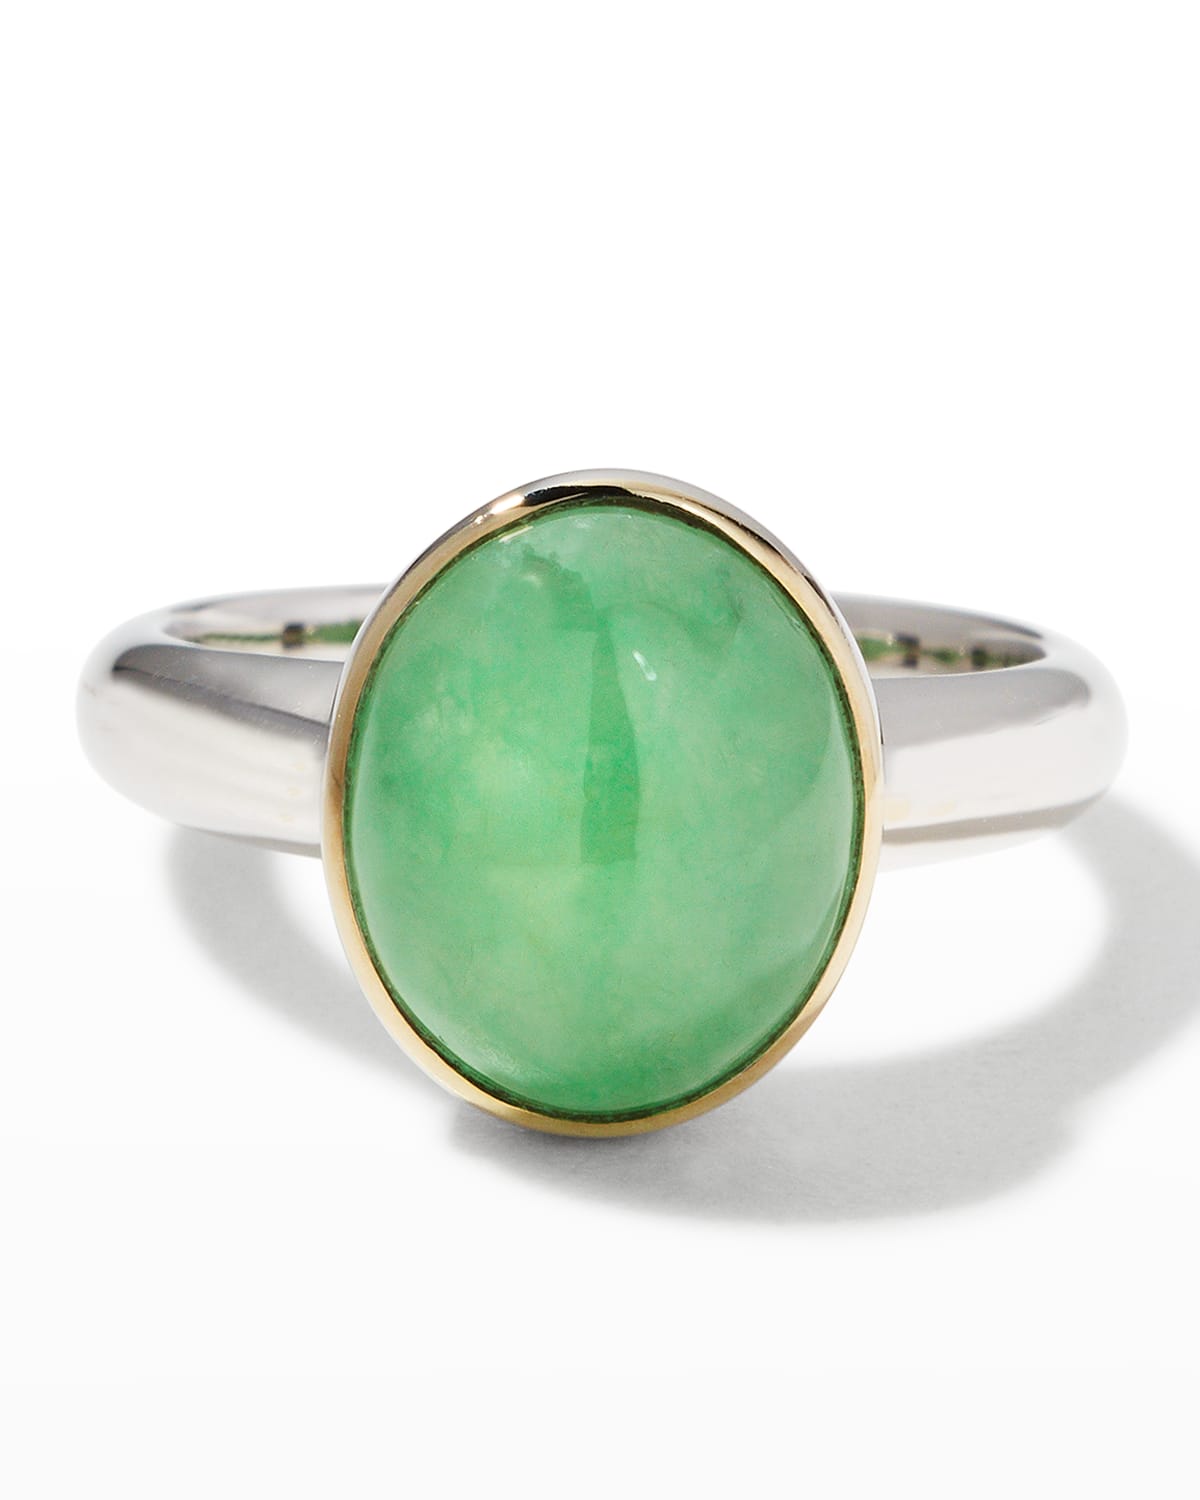 Green Lucite Bejeweled Stretch Ring